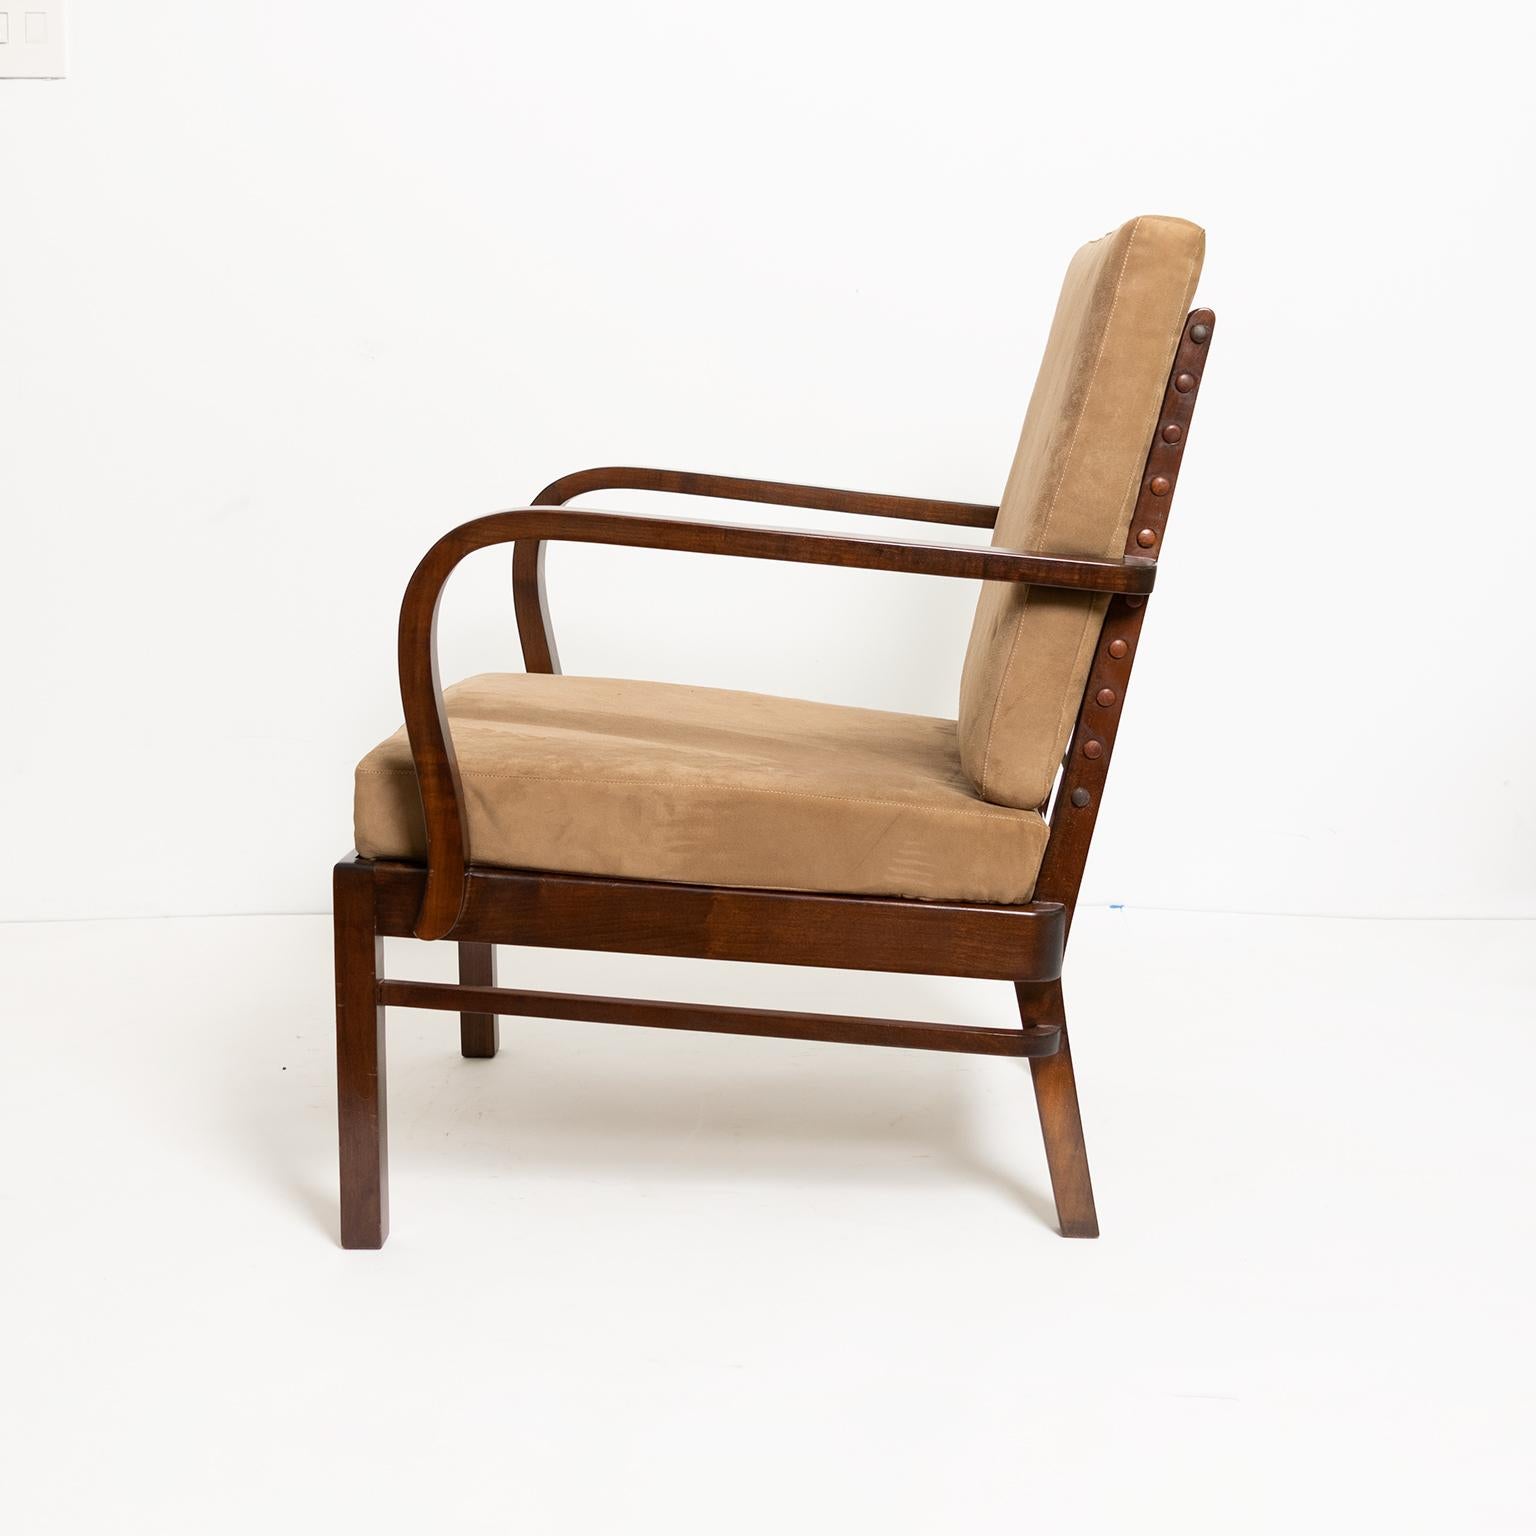 Modernist 1920s Lounge Chair Designed by Wilhelm Knoll for Knoll Antimott 2